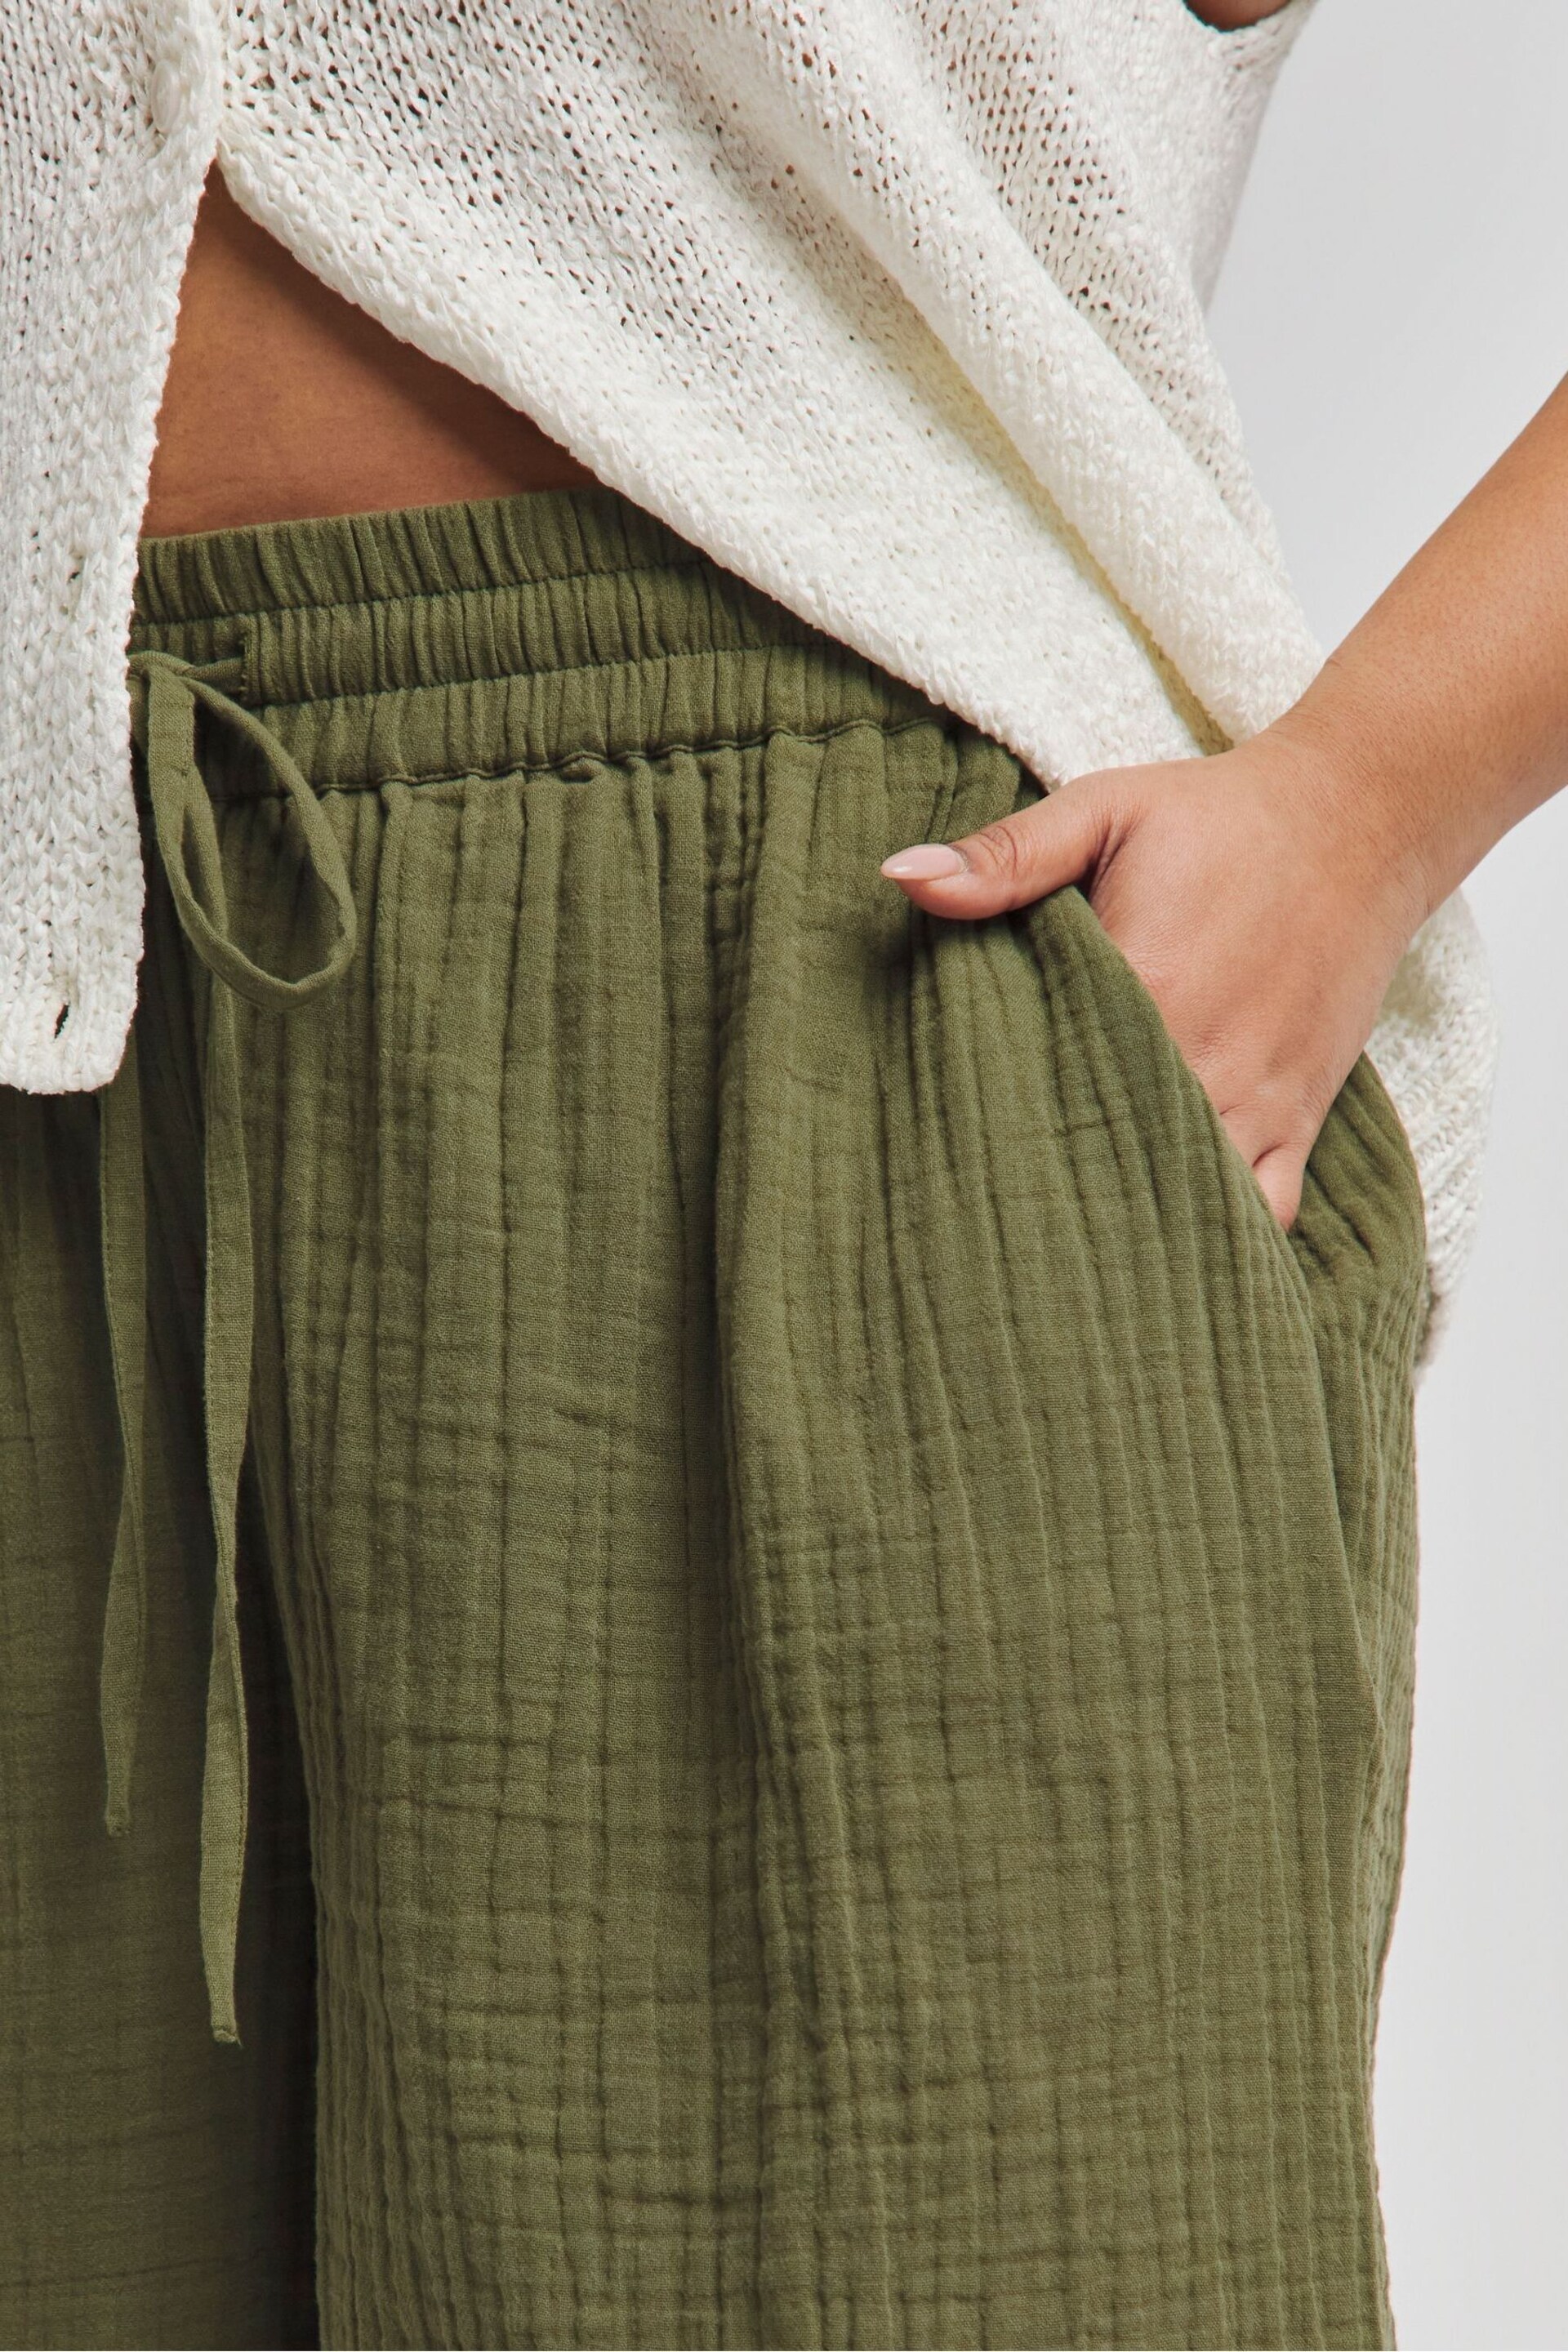 Simply Be Green Cheesecloth Shorts - Image 4 of 4